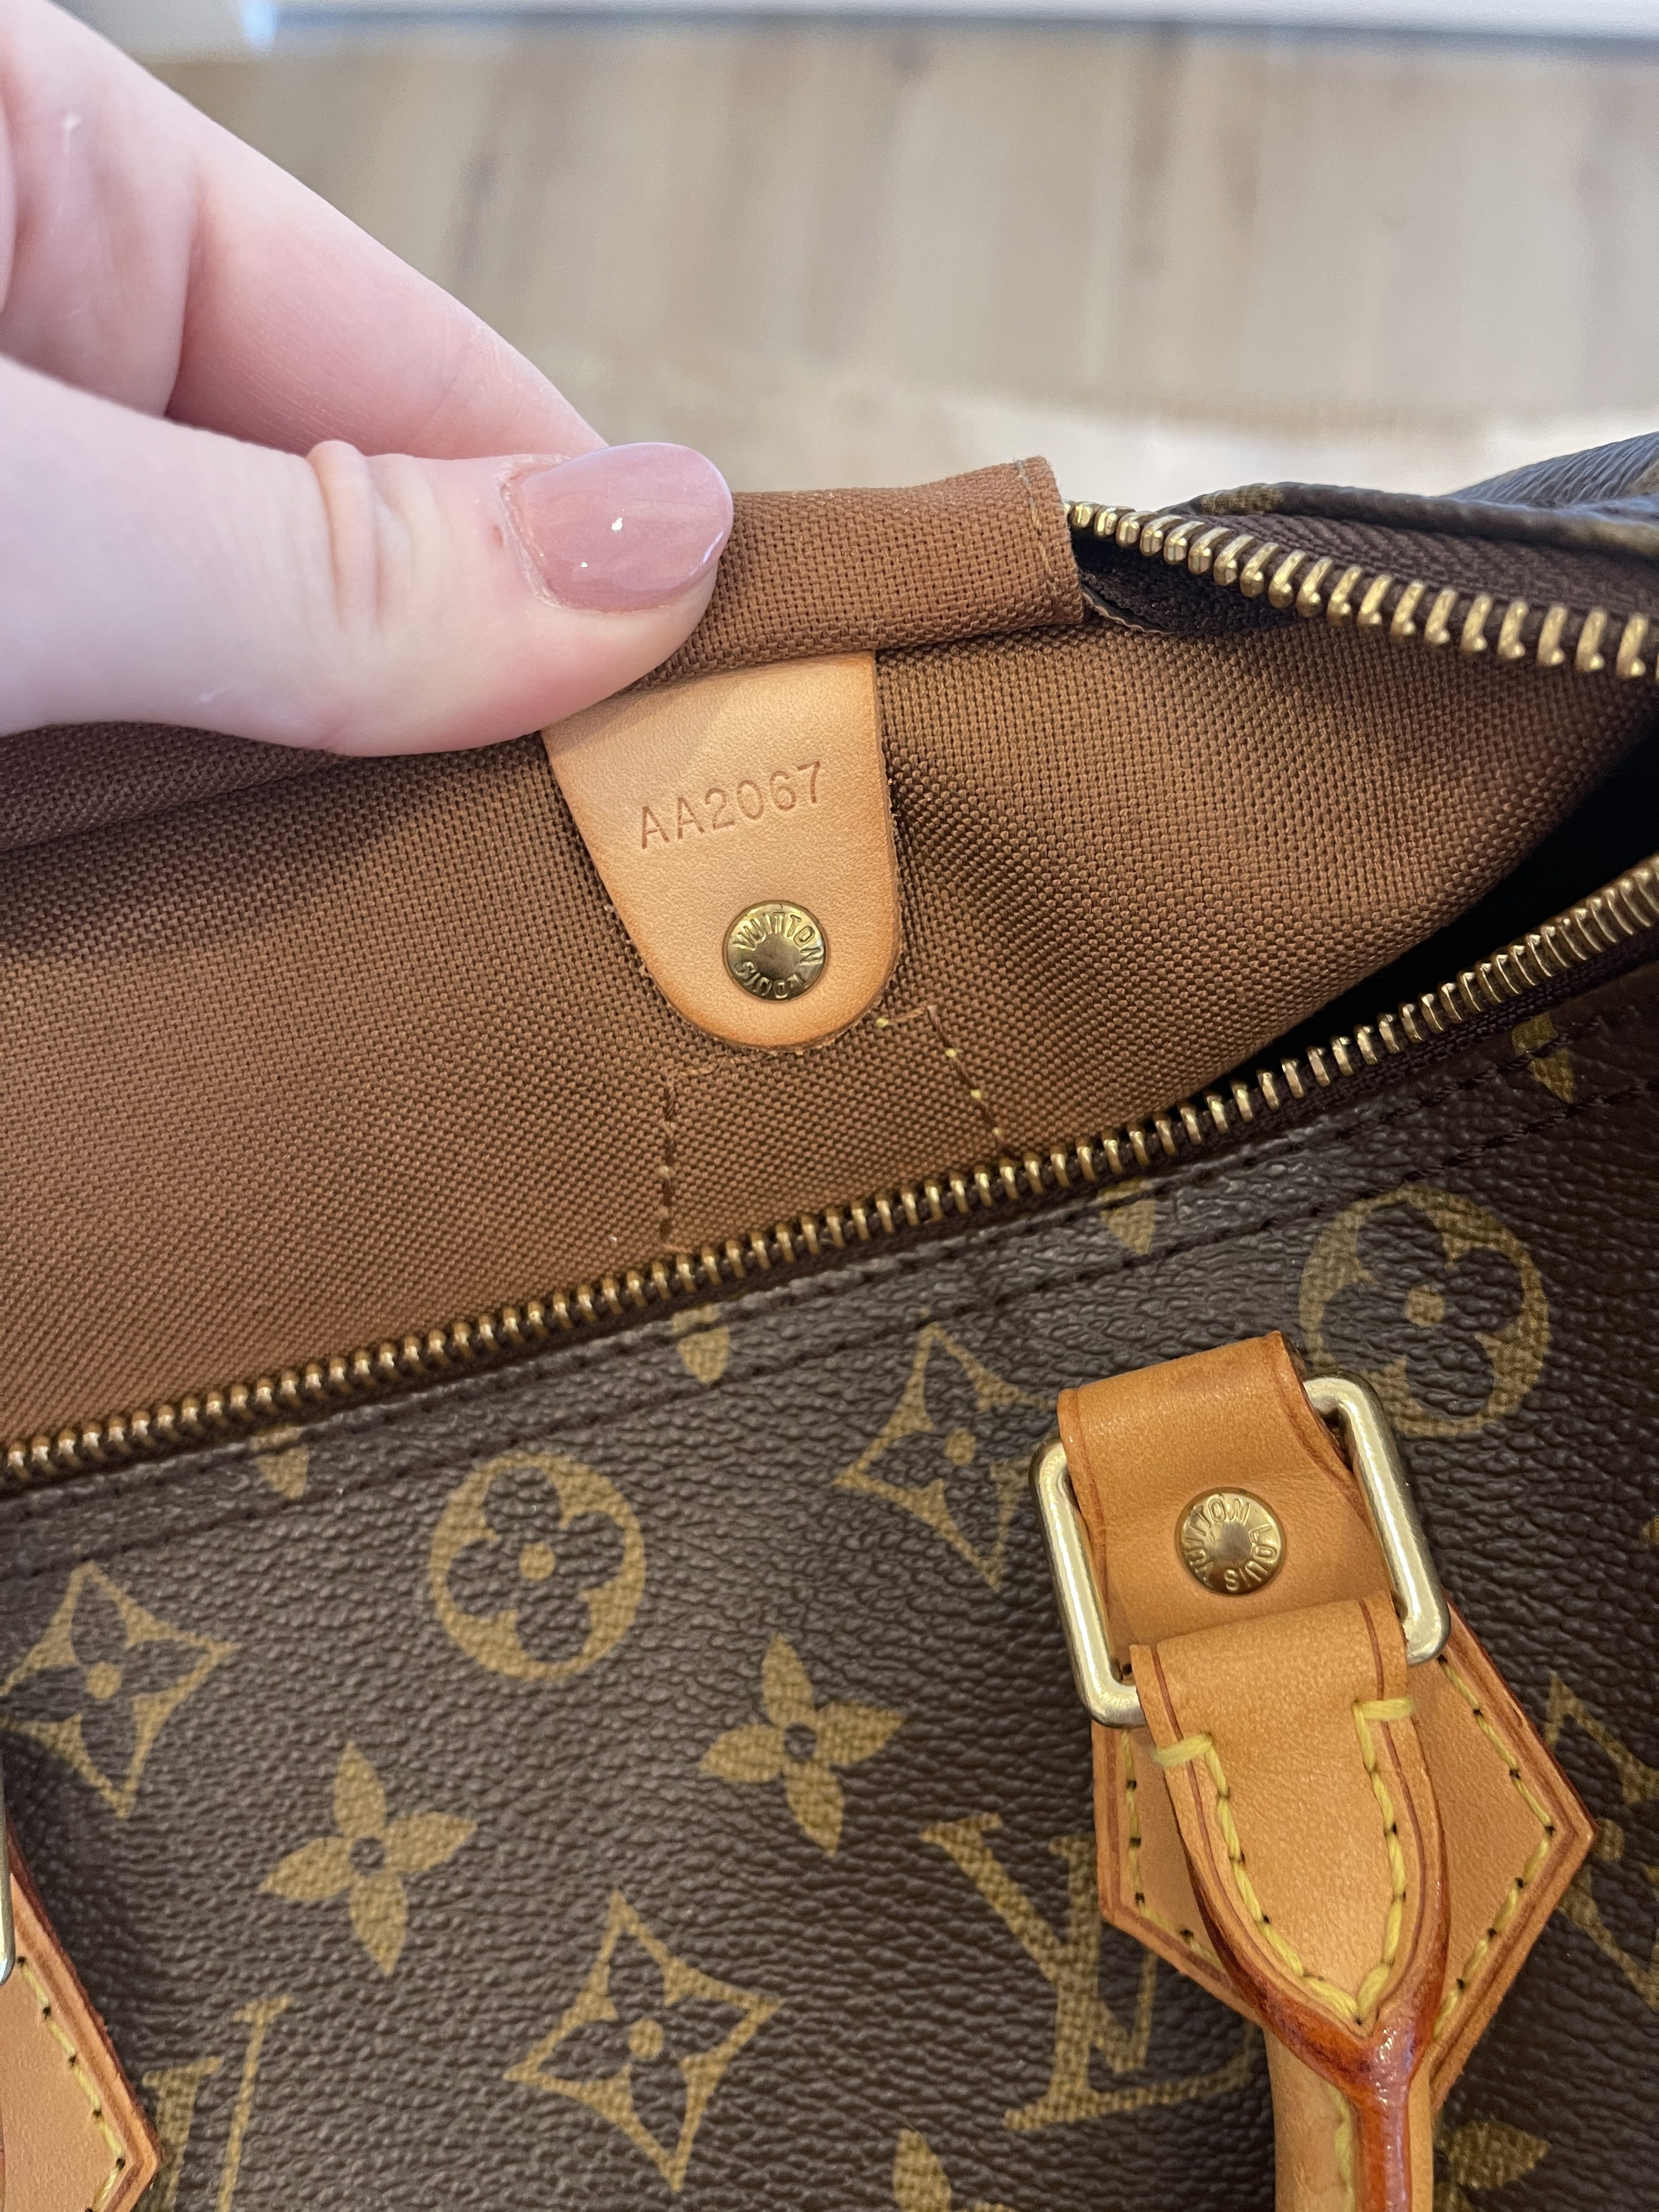 Authentic Louis Vuitton Speedy 30 Pictures and Date Code 